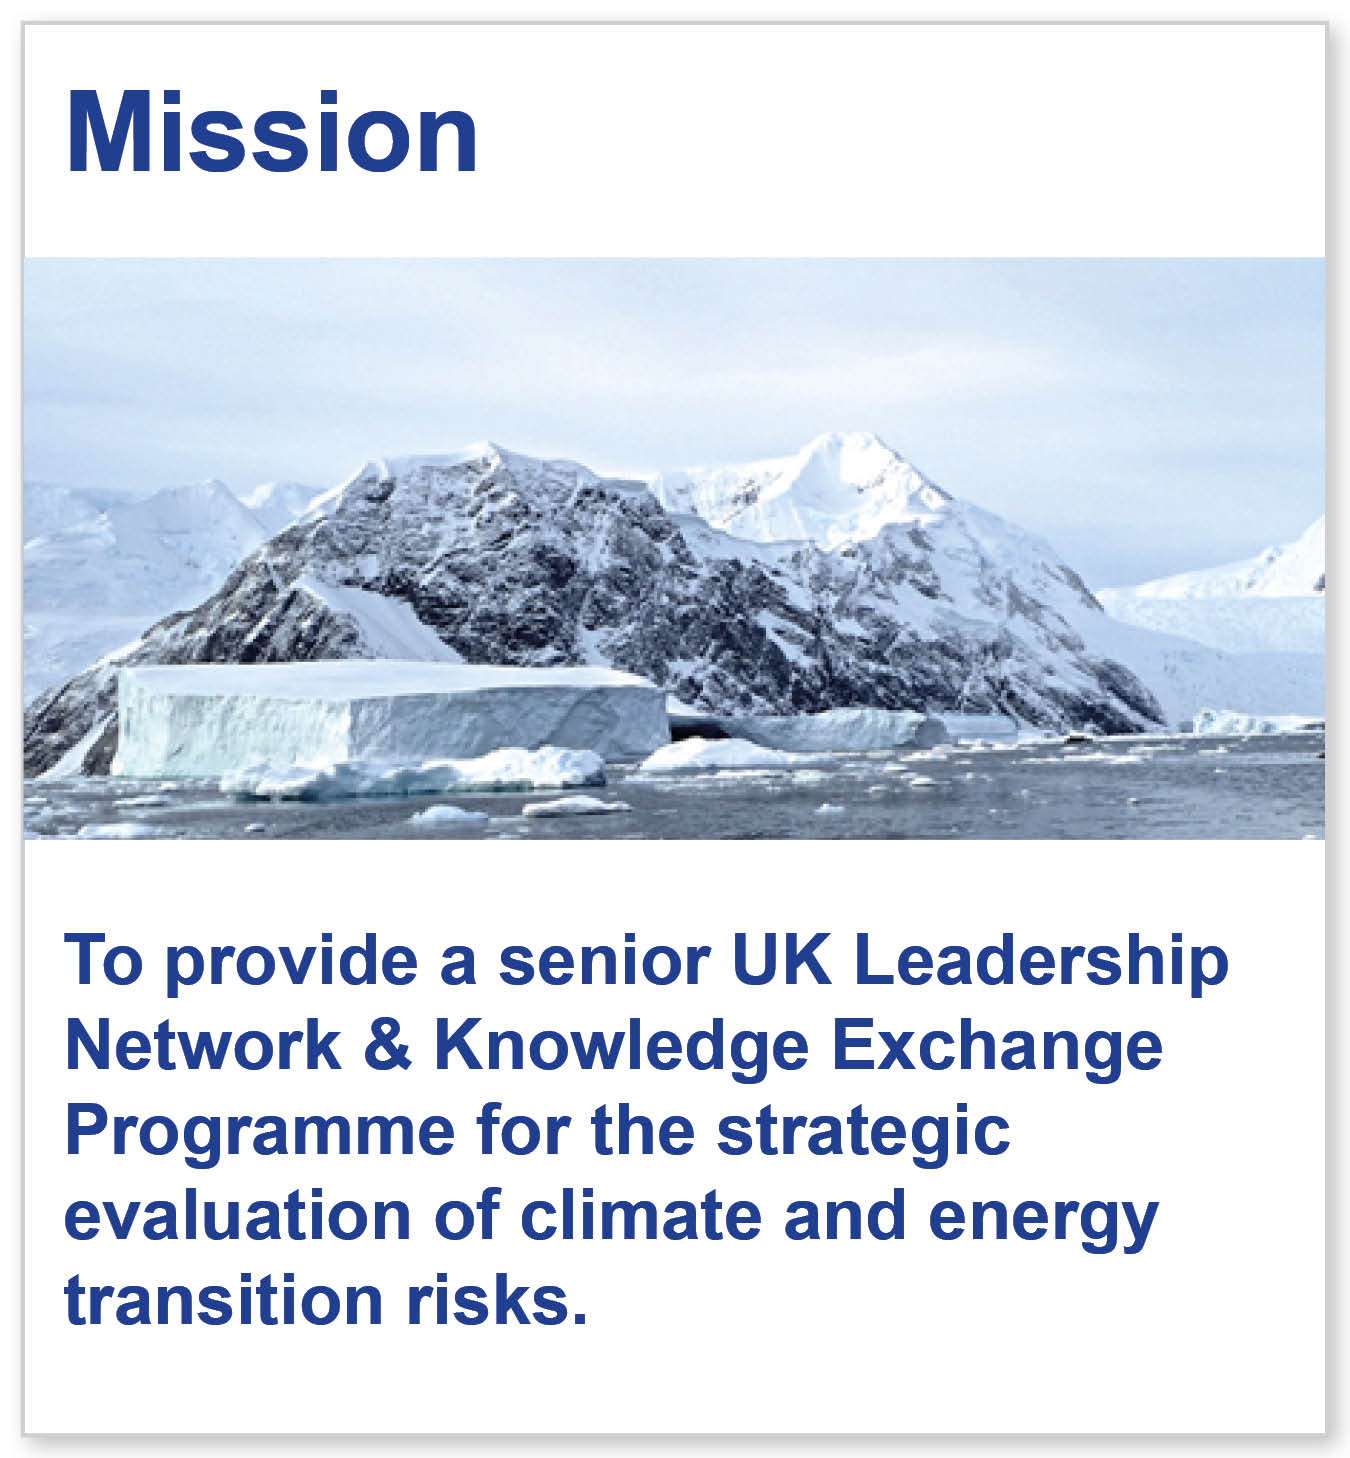 Westminster Energy Forum Mission Image